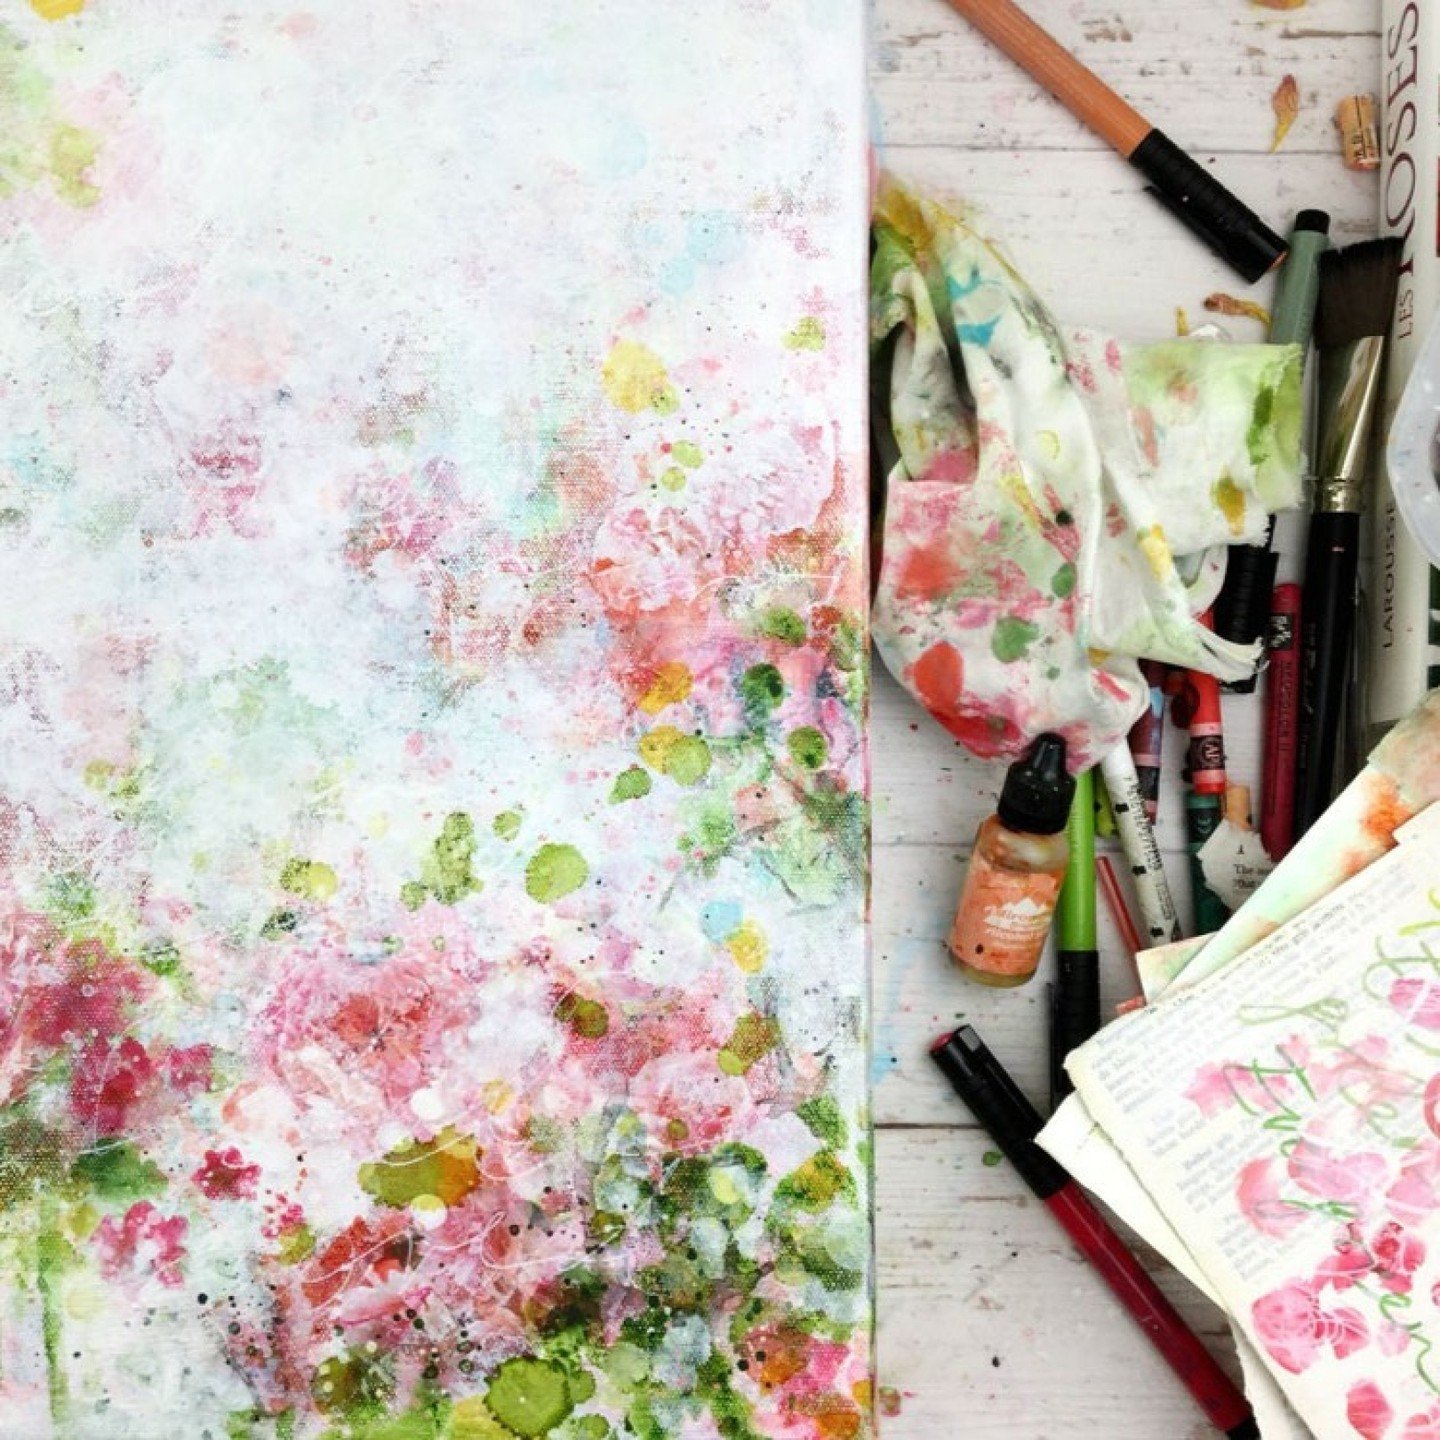 Today is the LAST DAY to get 20% off my Wild Roses painting class!🌸🌸🌸

Do you feel intimidated at the thought of creating realistic paintings? What if you could paint flowers in a way that just flows, with fun techniques that will give you amazing